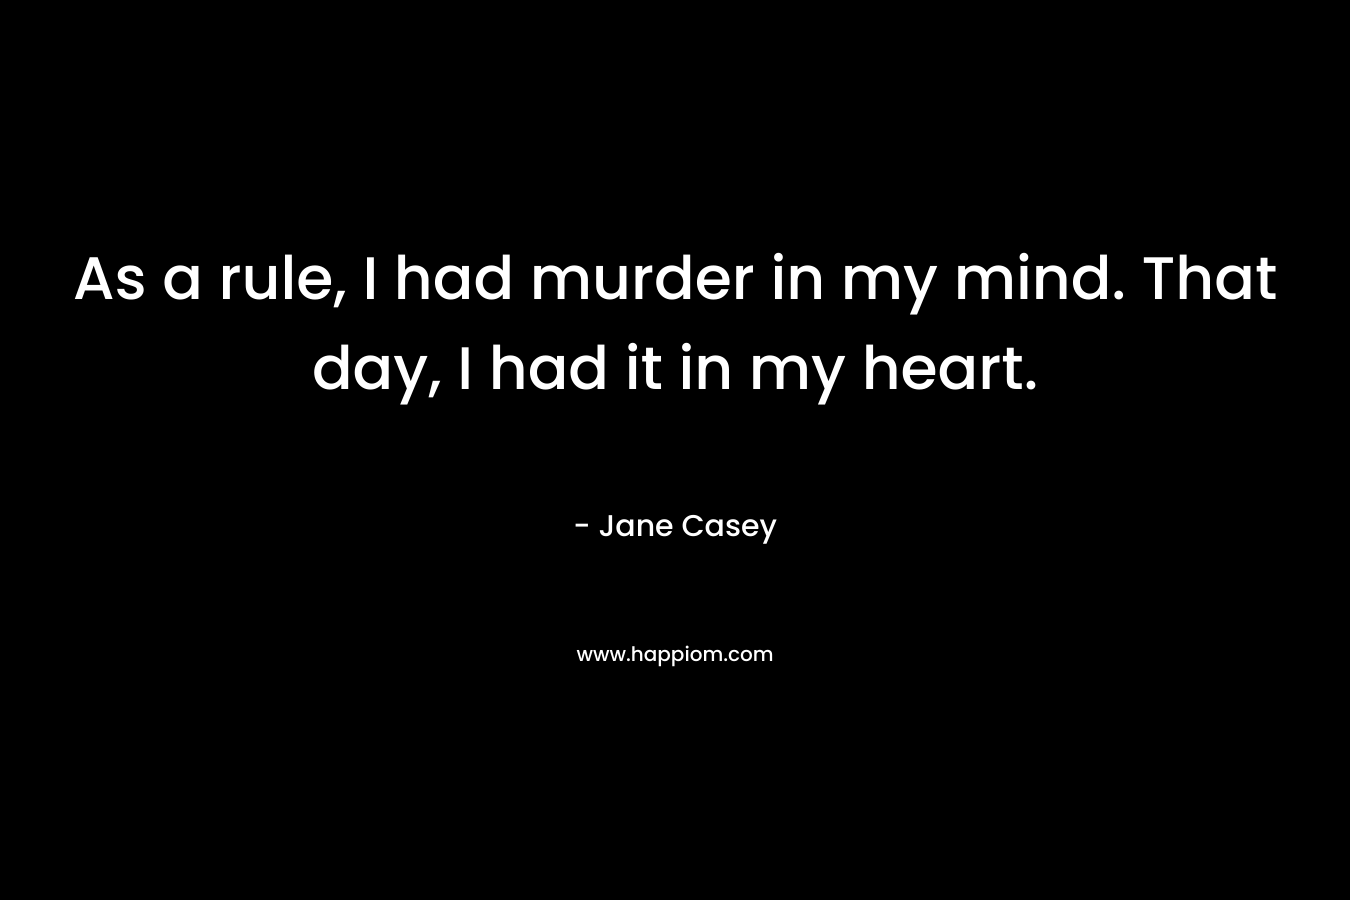 As a rule, I had murder in my mind. That day, I had it in my heart.